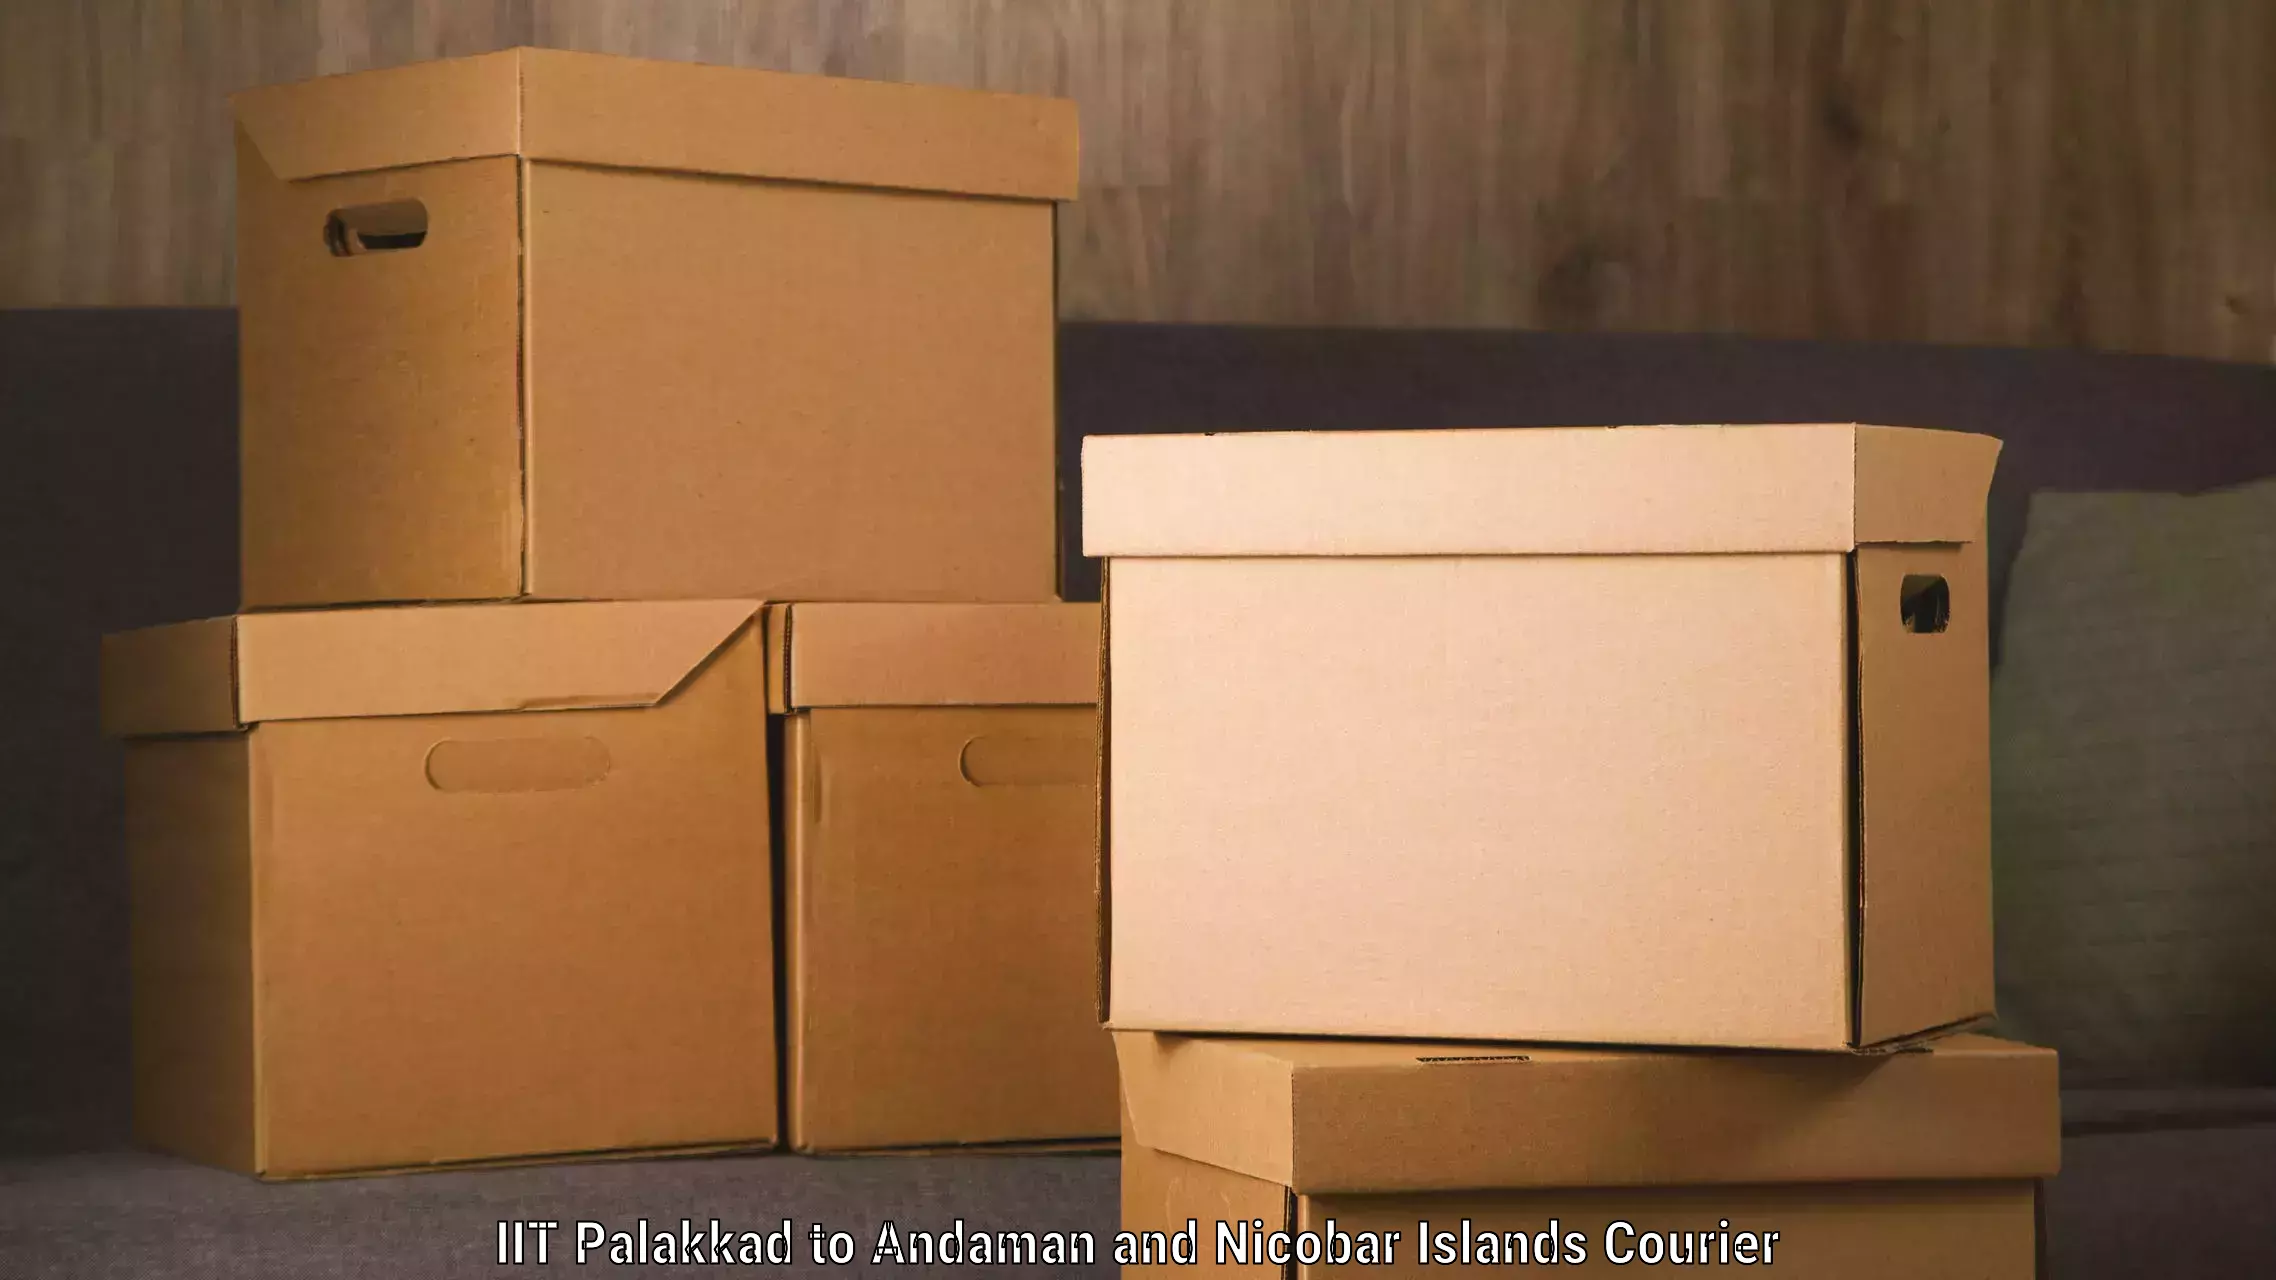 Fastest parcel delivery in IIT Palakkad to Andaman and Nicobar Islands